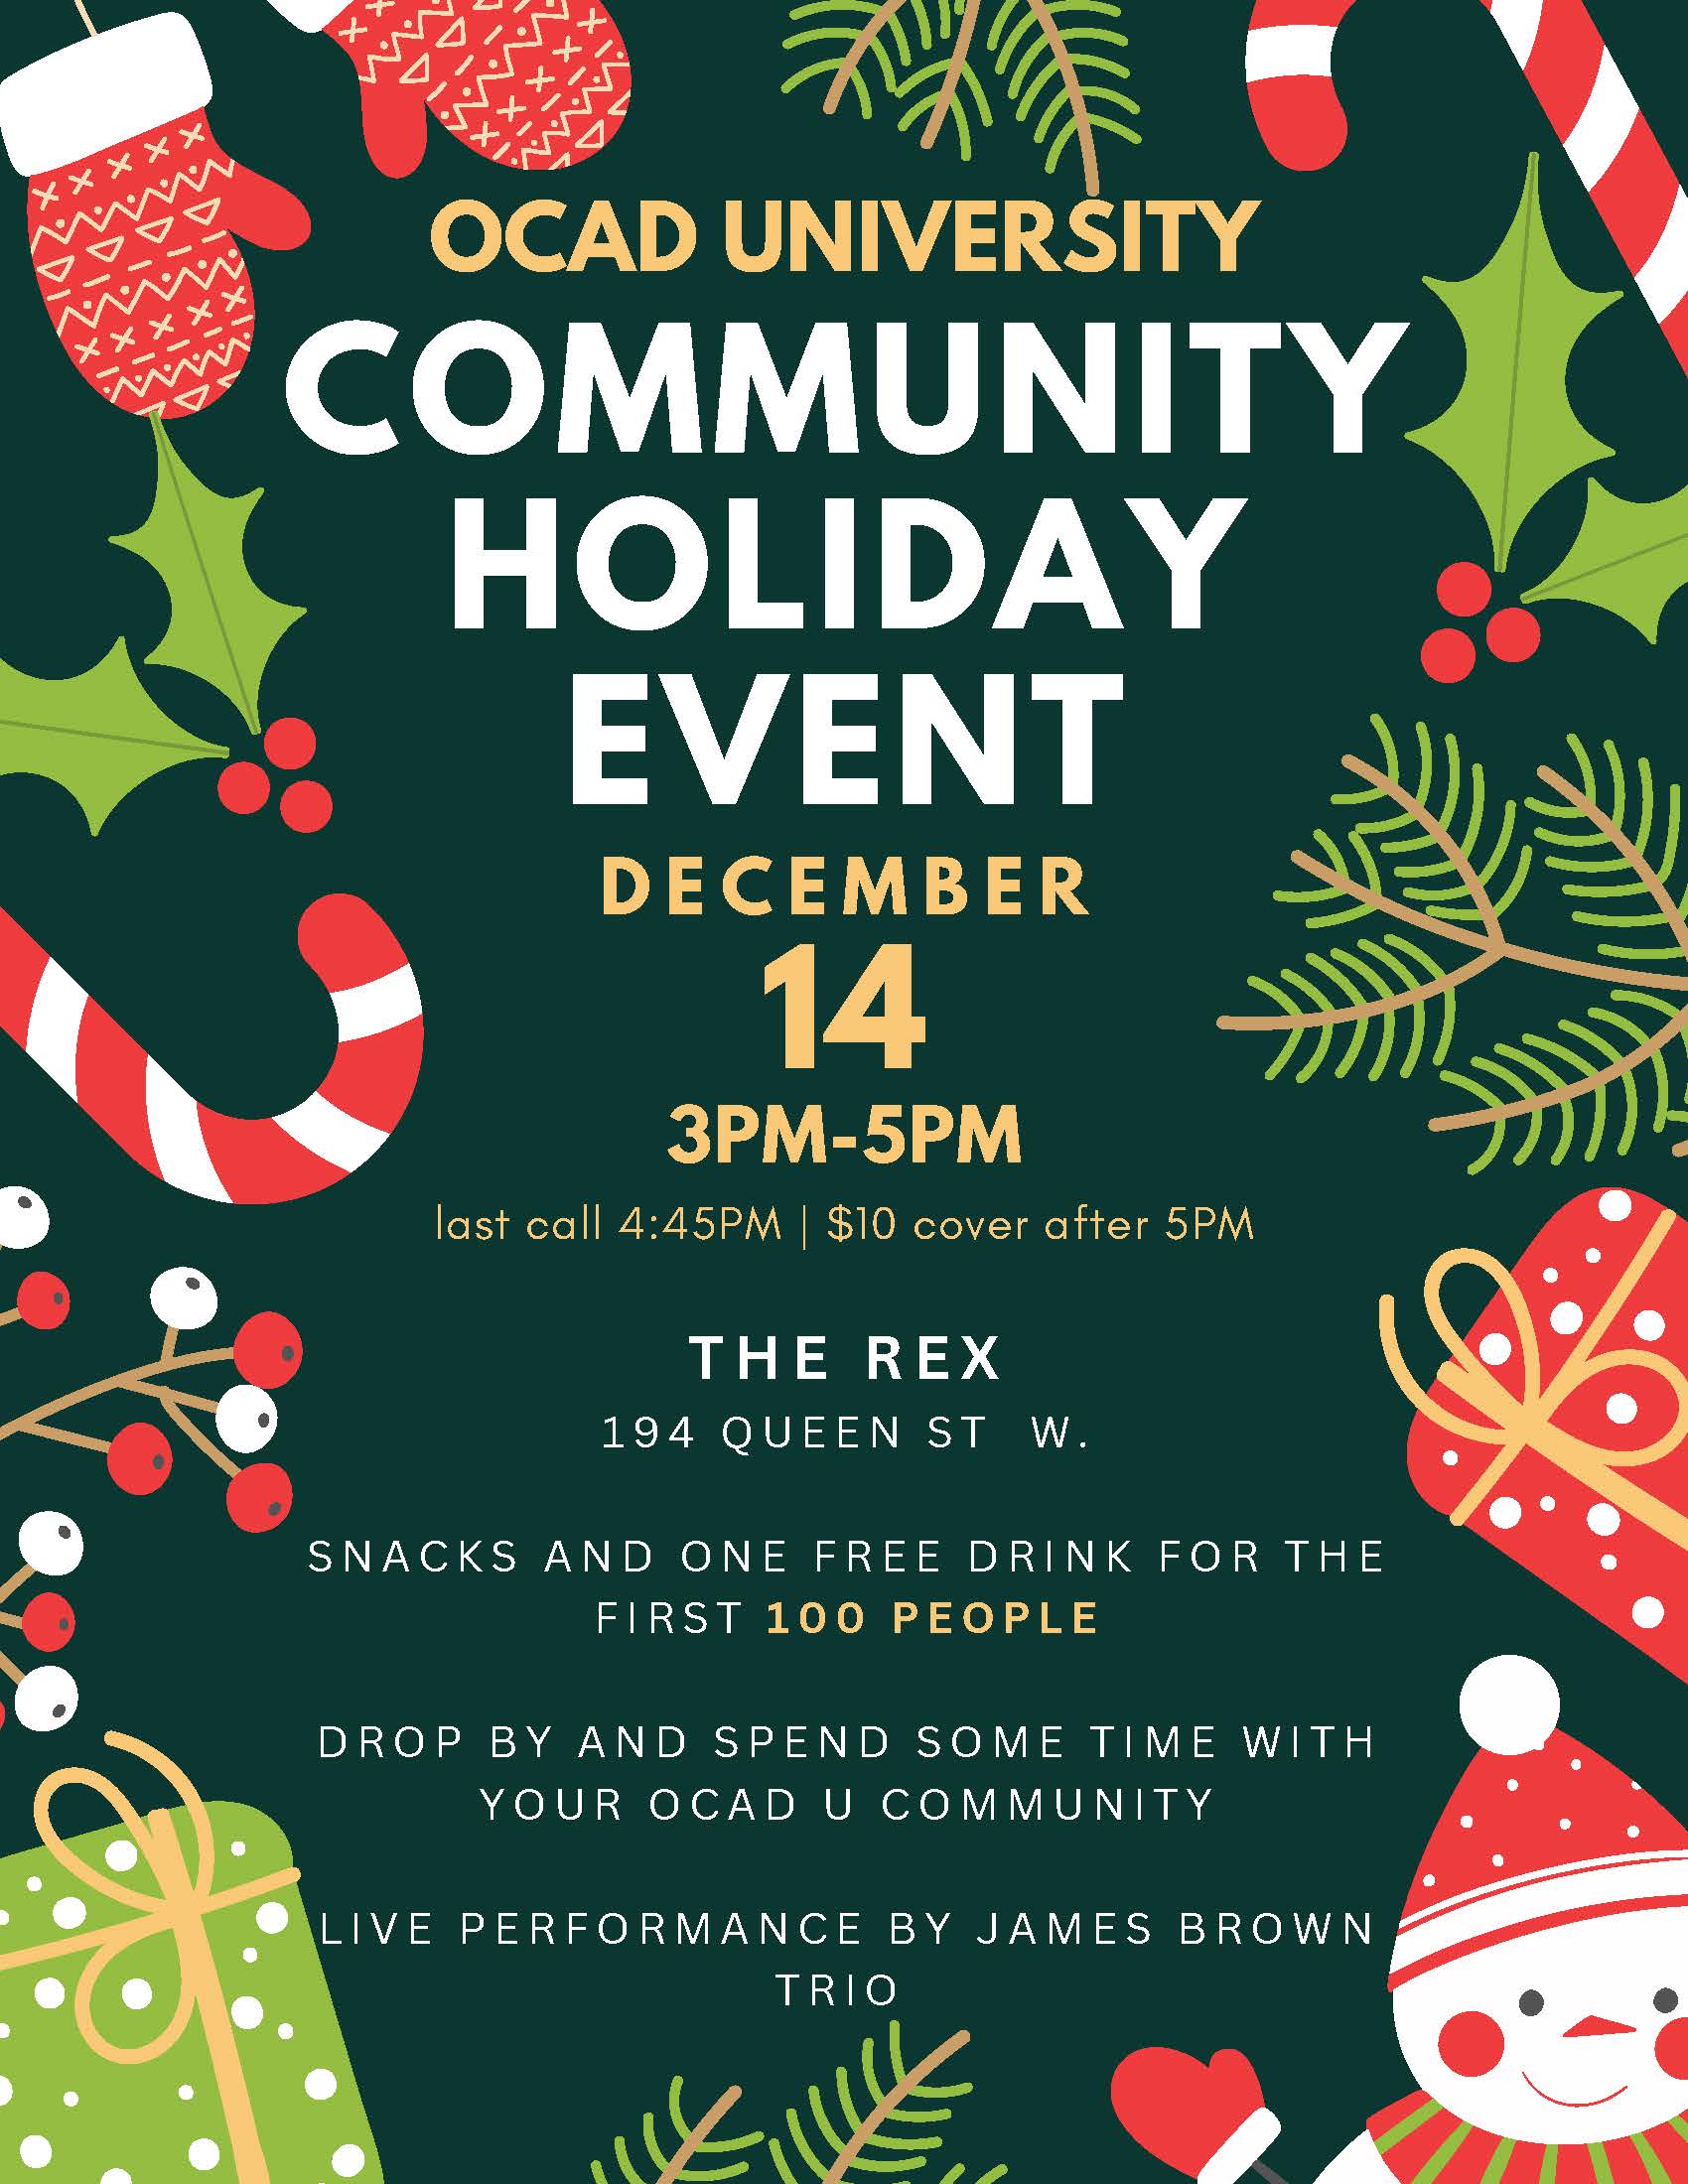 OCAD University Community Holiday Event. December 14 at 3pm to 5pm. At the Rex located at 194 Queen St West. Snacks and One Free Drink for the first 100 people. We hope you can drop by and spend some time with your OCAD U community. Live Performance from James Brown Trio. Cash Bar.